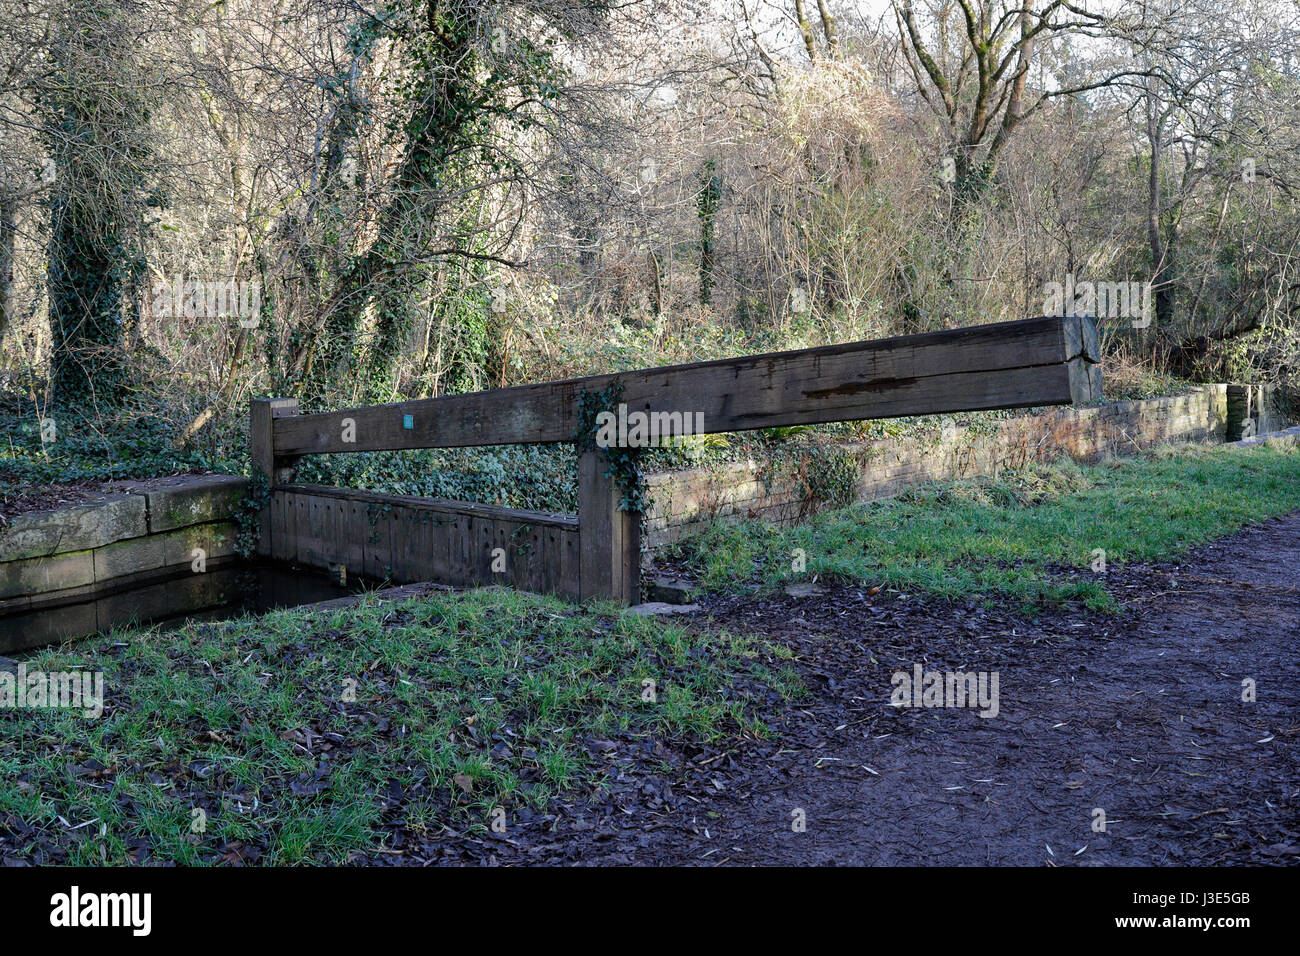 Glamorganshire canal at Forest farm Cardiff Wales UK, Wooden lock gate, nature reserve Stock Photo